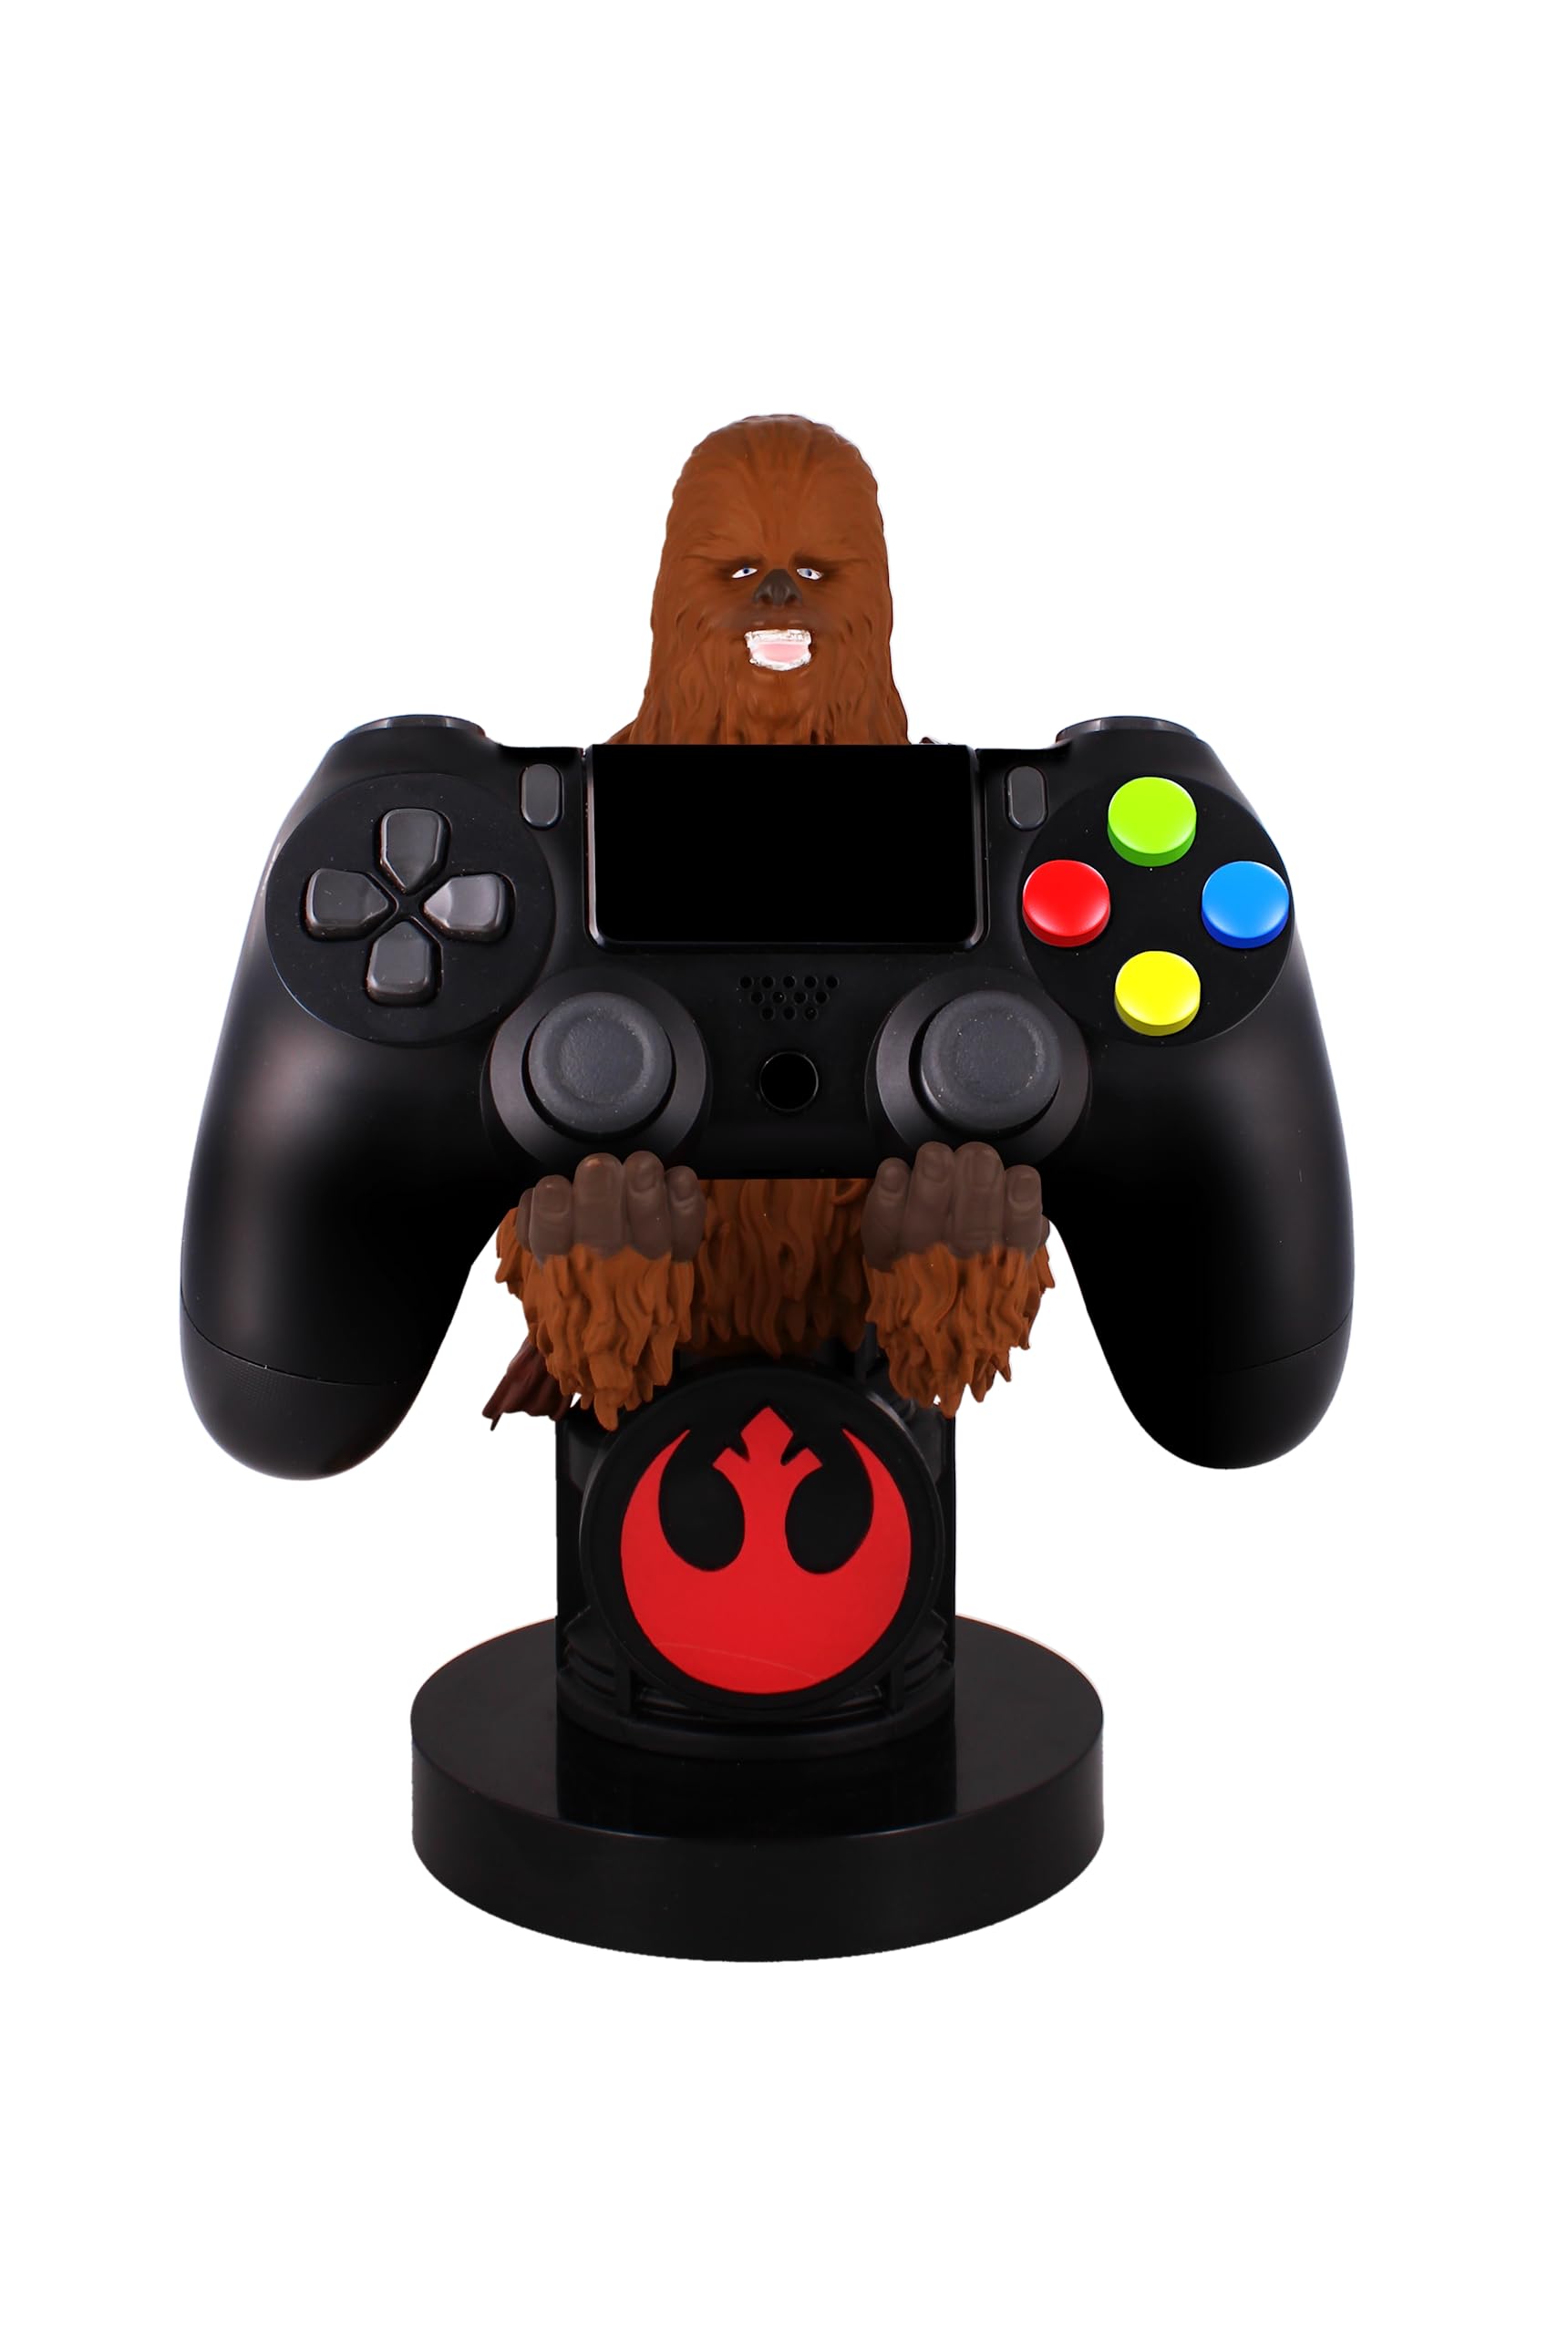 Exquisite Gaming Cable Guy: Phone/Controller Holder - Star Wars Chewbacca